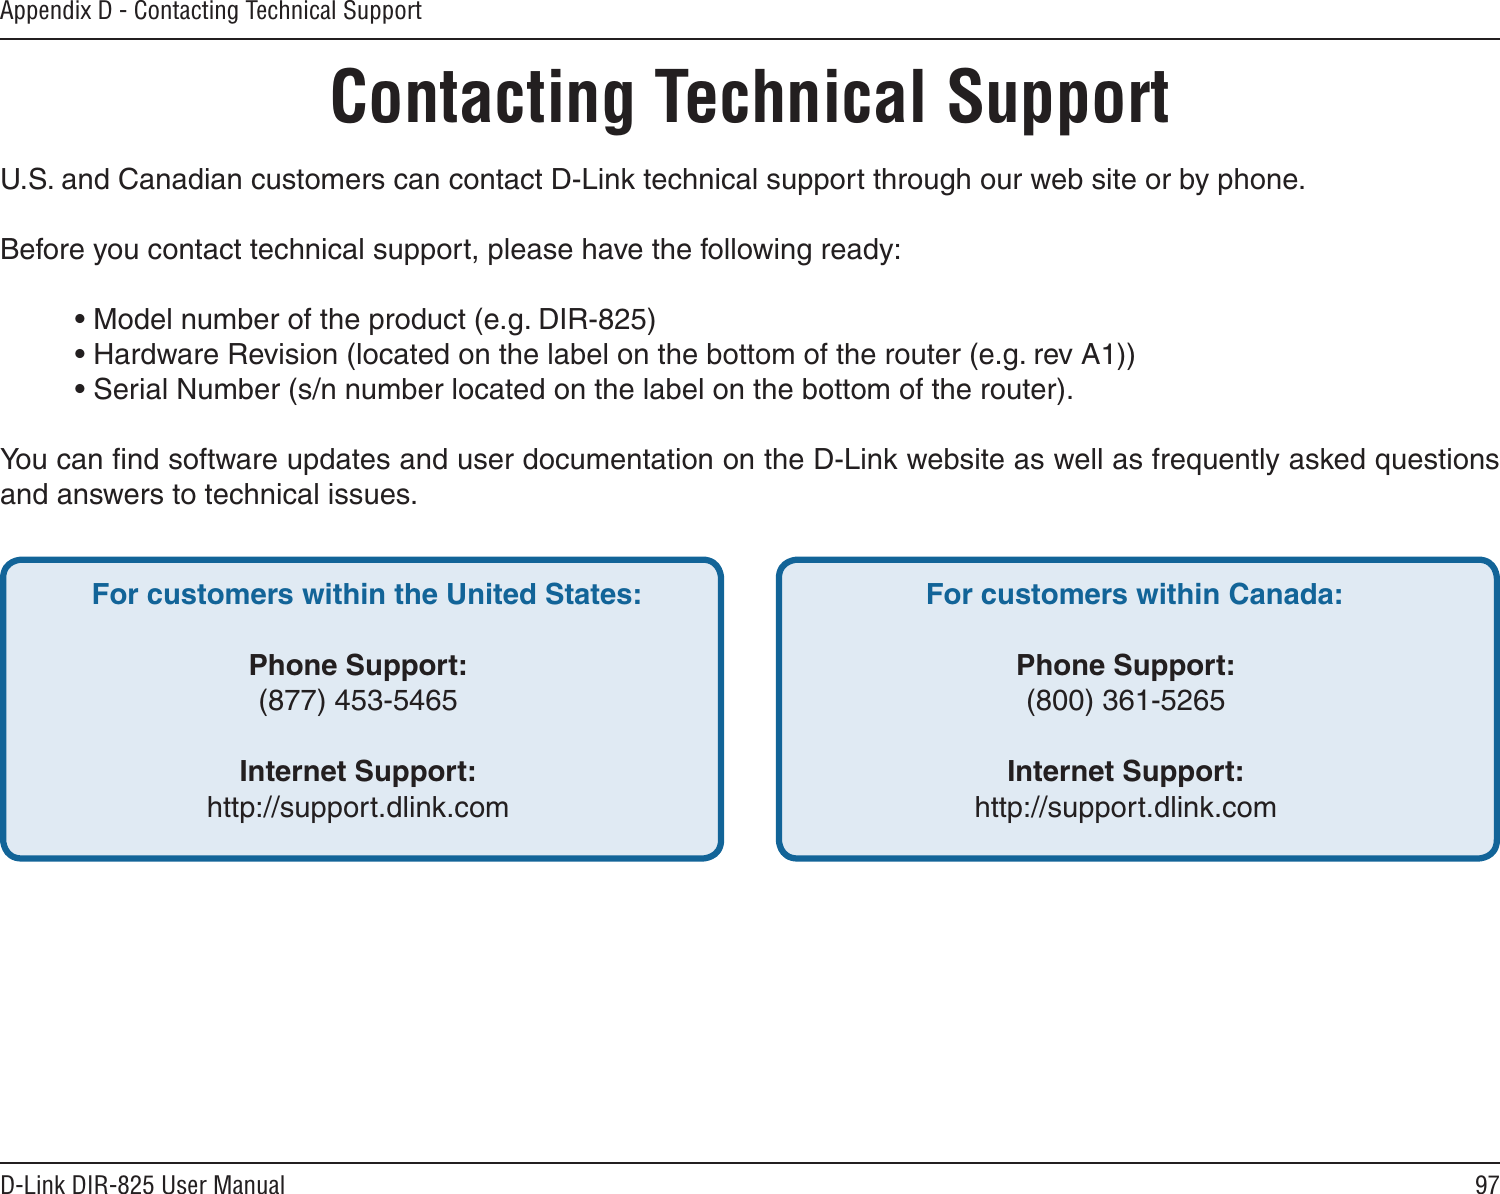 97D-Link DIR-825 User ManualAppendix D - Contacting Technical SupportContacting Technical SupportU.S. and Canadian customers can contact D-Link technical support through our web site or by phone.Before you contact technical support, please have the following ready:  • Model number of the product (e.g. DIR-825)  • Hardware Revision (located on the label on the bottom of the router (e.g. rev A1))  • Serial Number (s/n number located on the label on the bottom of the router). You can ﬁnd software updates and user documentation on the D-Link website as well as frequently asked questions and answers to technical issues.For customers within the United States: Phone Support:(877) 453-5465Internet Support:http://support.dlink.com For customers within Canada: Phone Support:(800) 361-5265Internet Support:http://support.dlink.com 